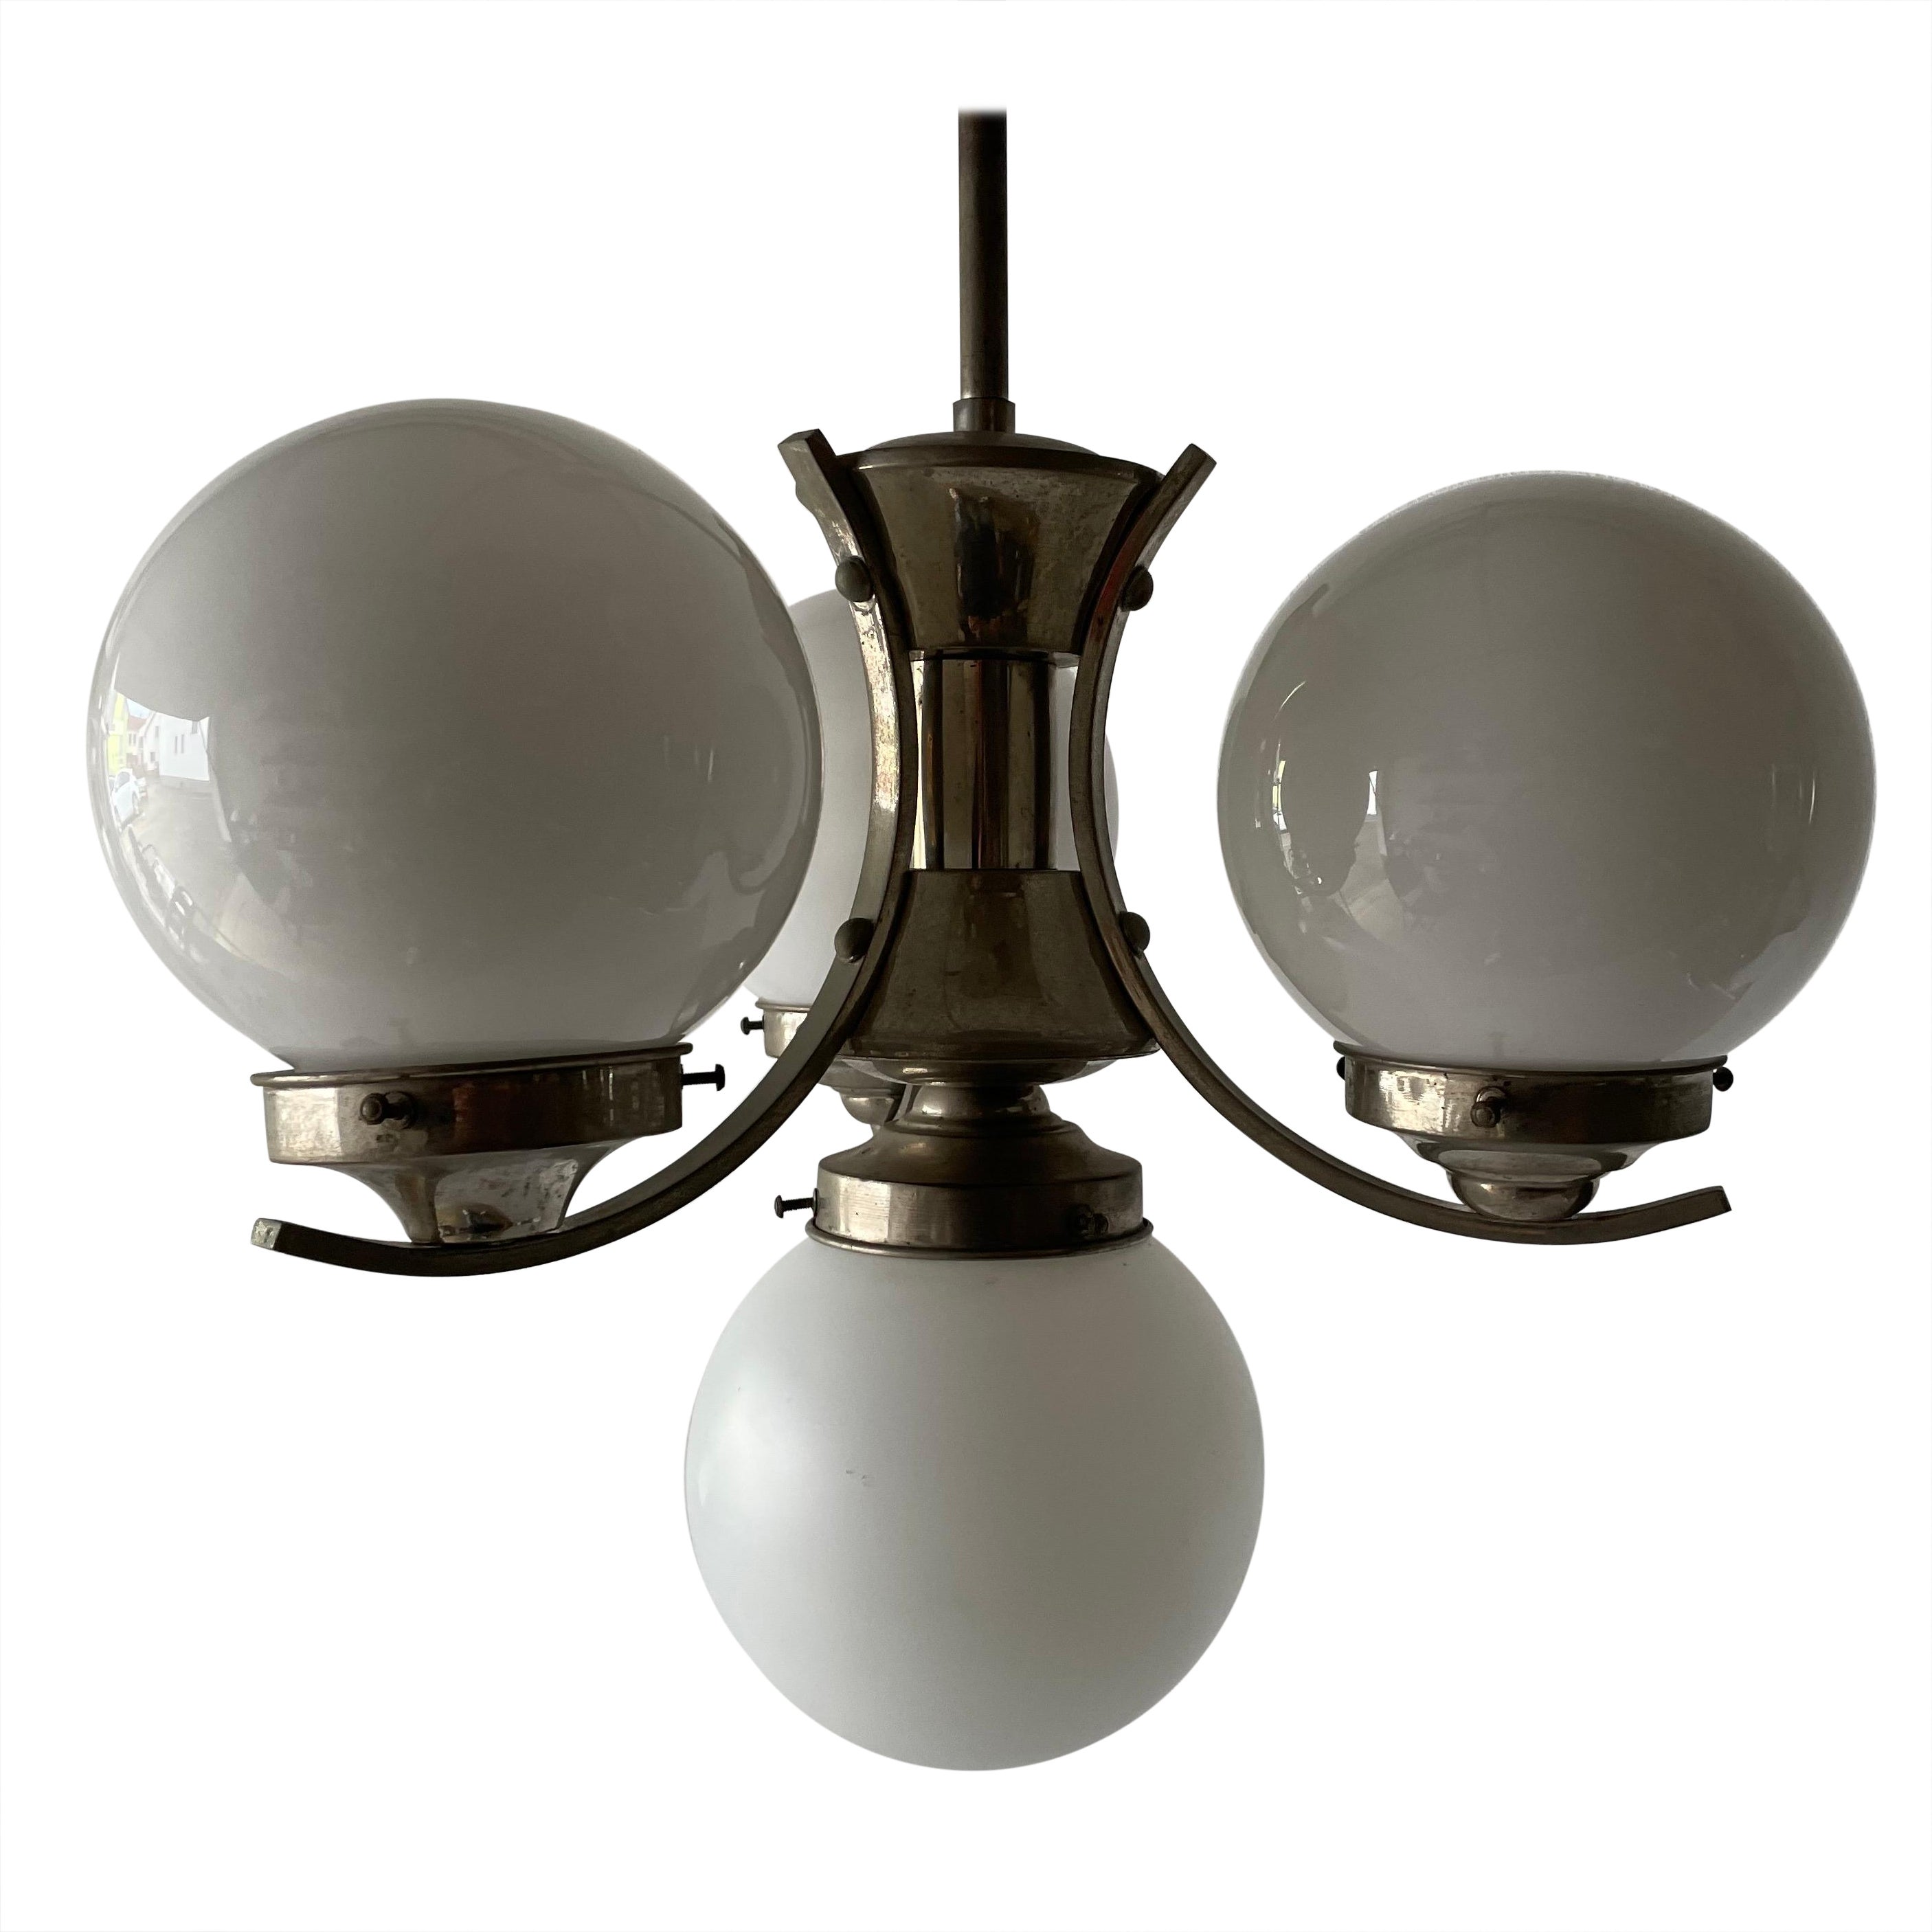 Art Deco Metallic Silver 4 Balls Ceiling Lamp, 1940s, Germany For Sale